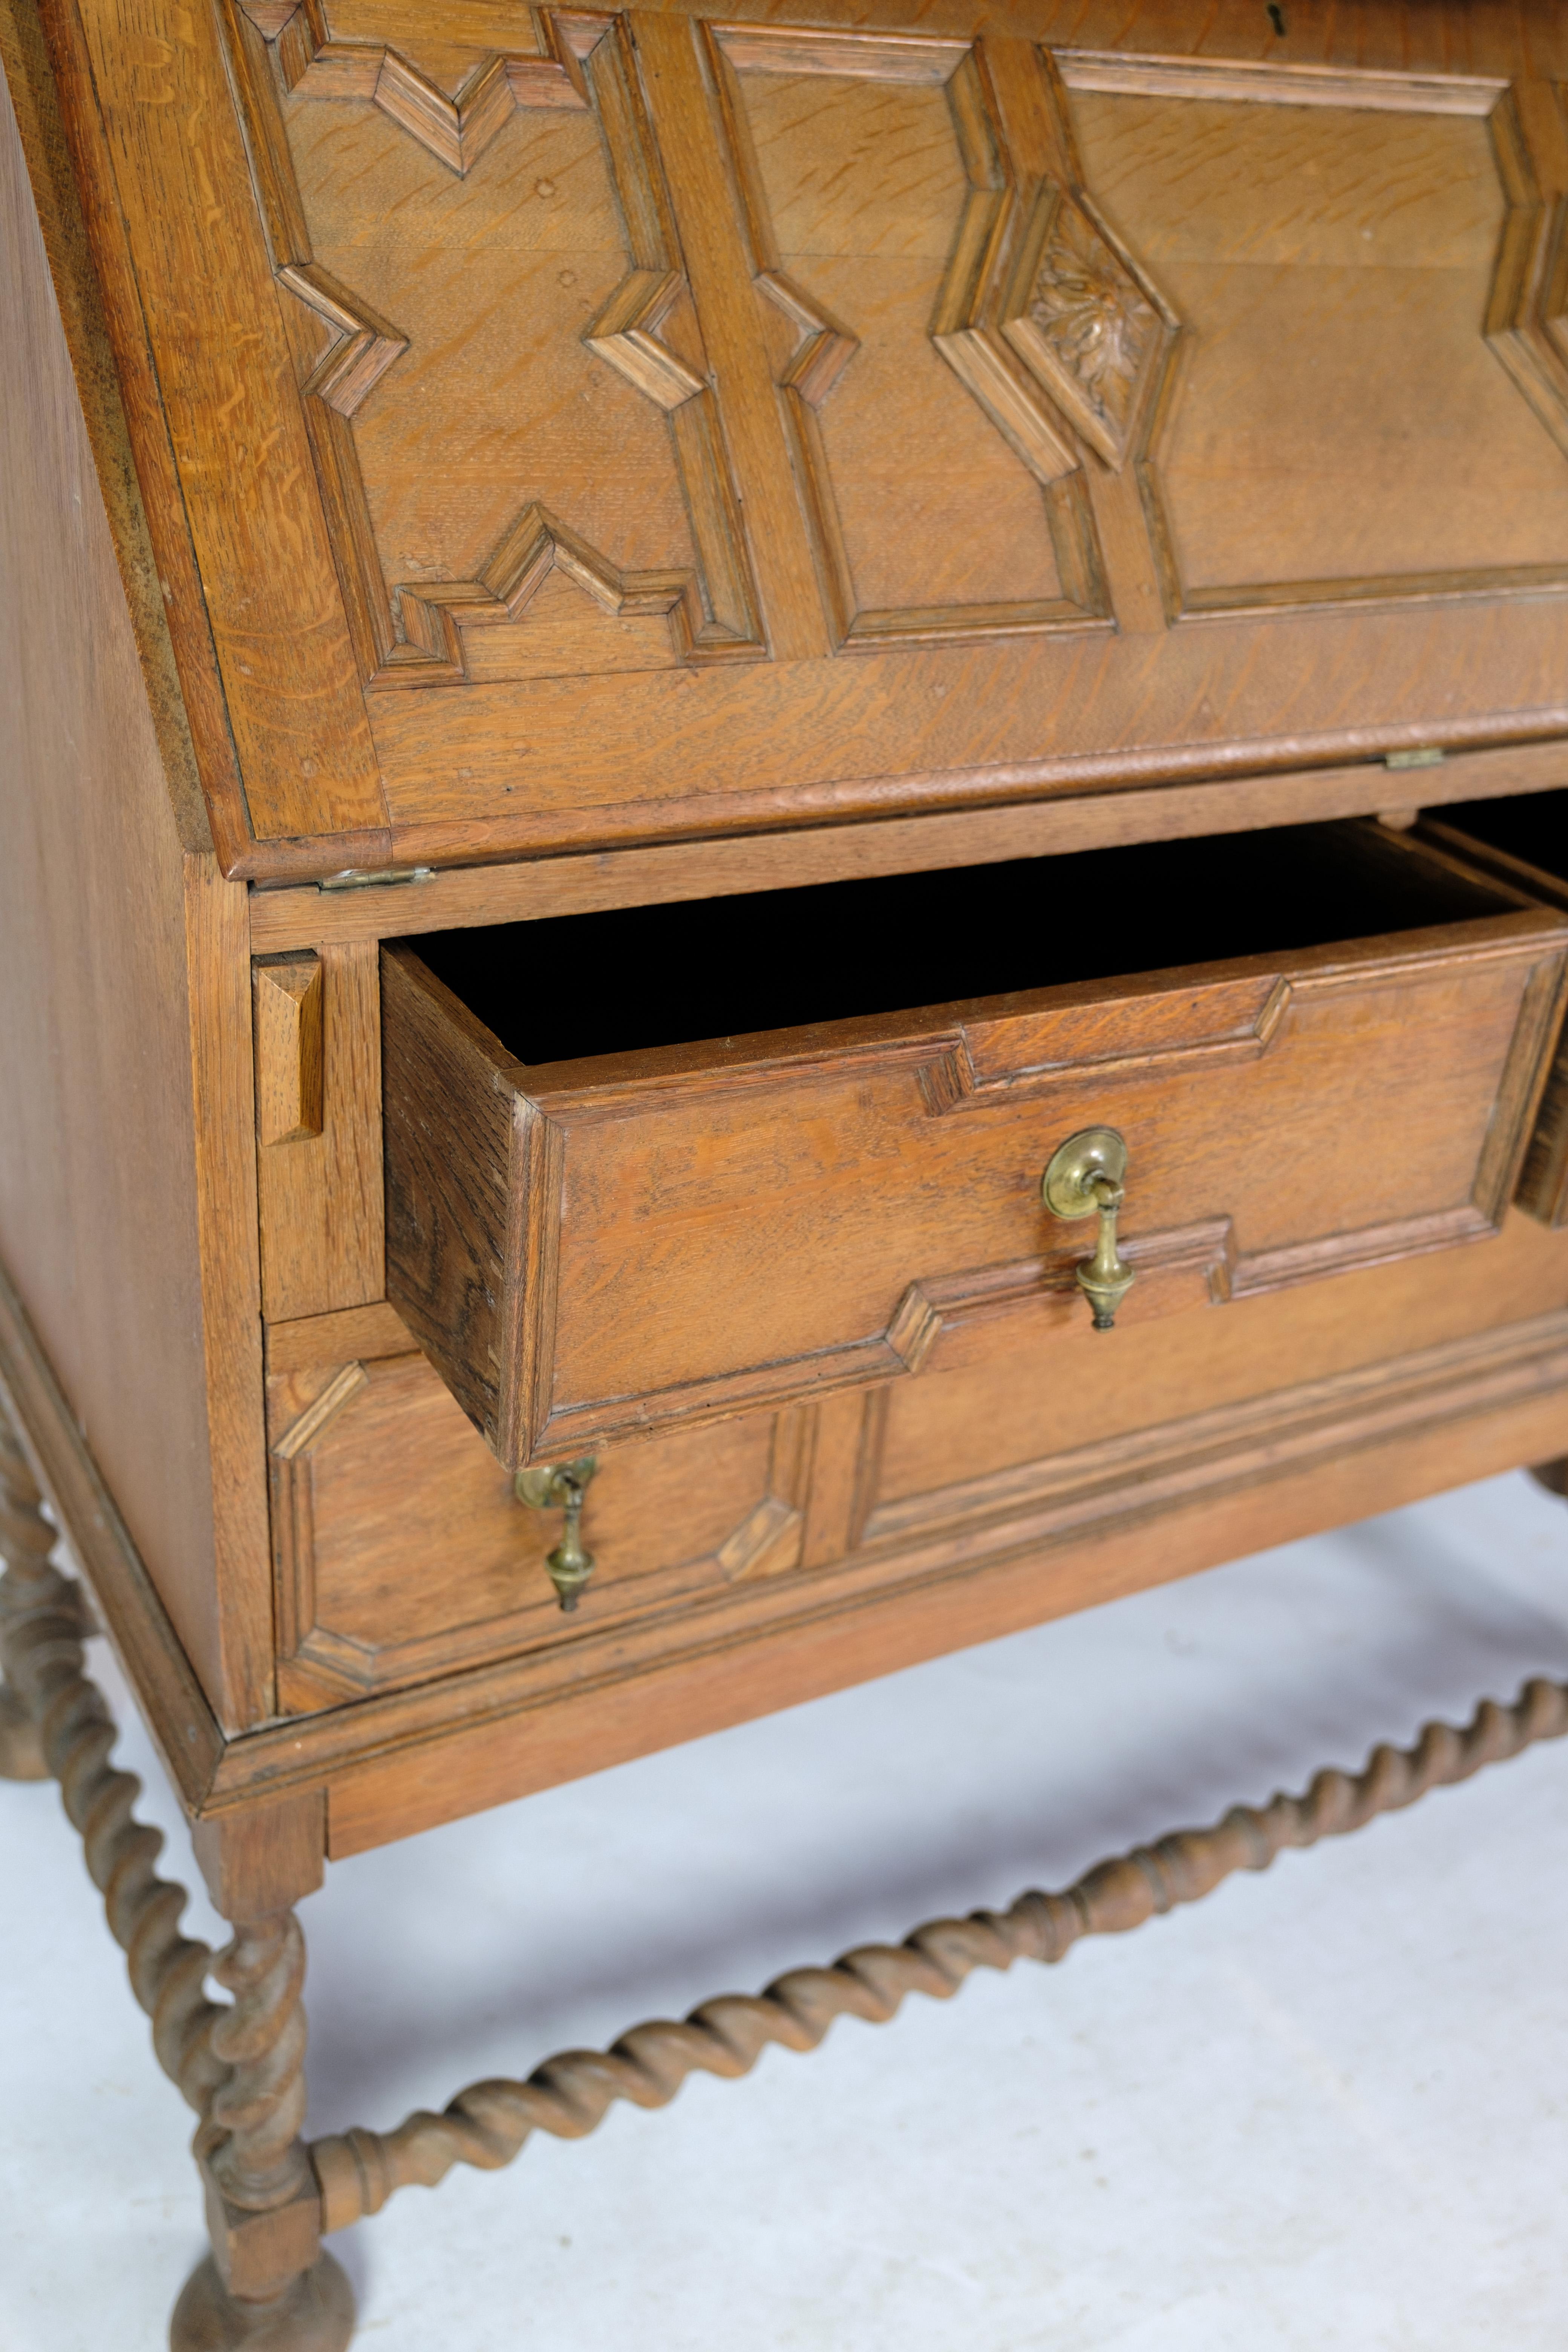 Late 19th Century Chatol with Upper cabinet in Oak with Wood Carvings from England, 1890 For Sale